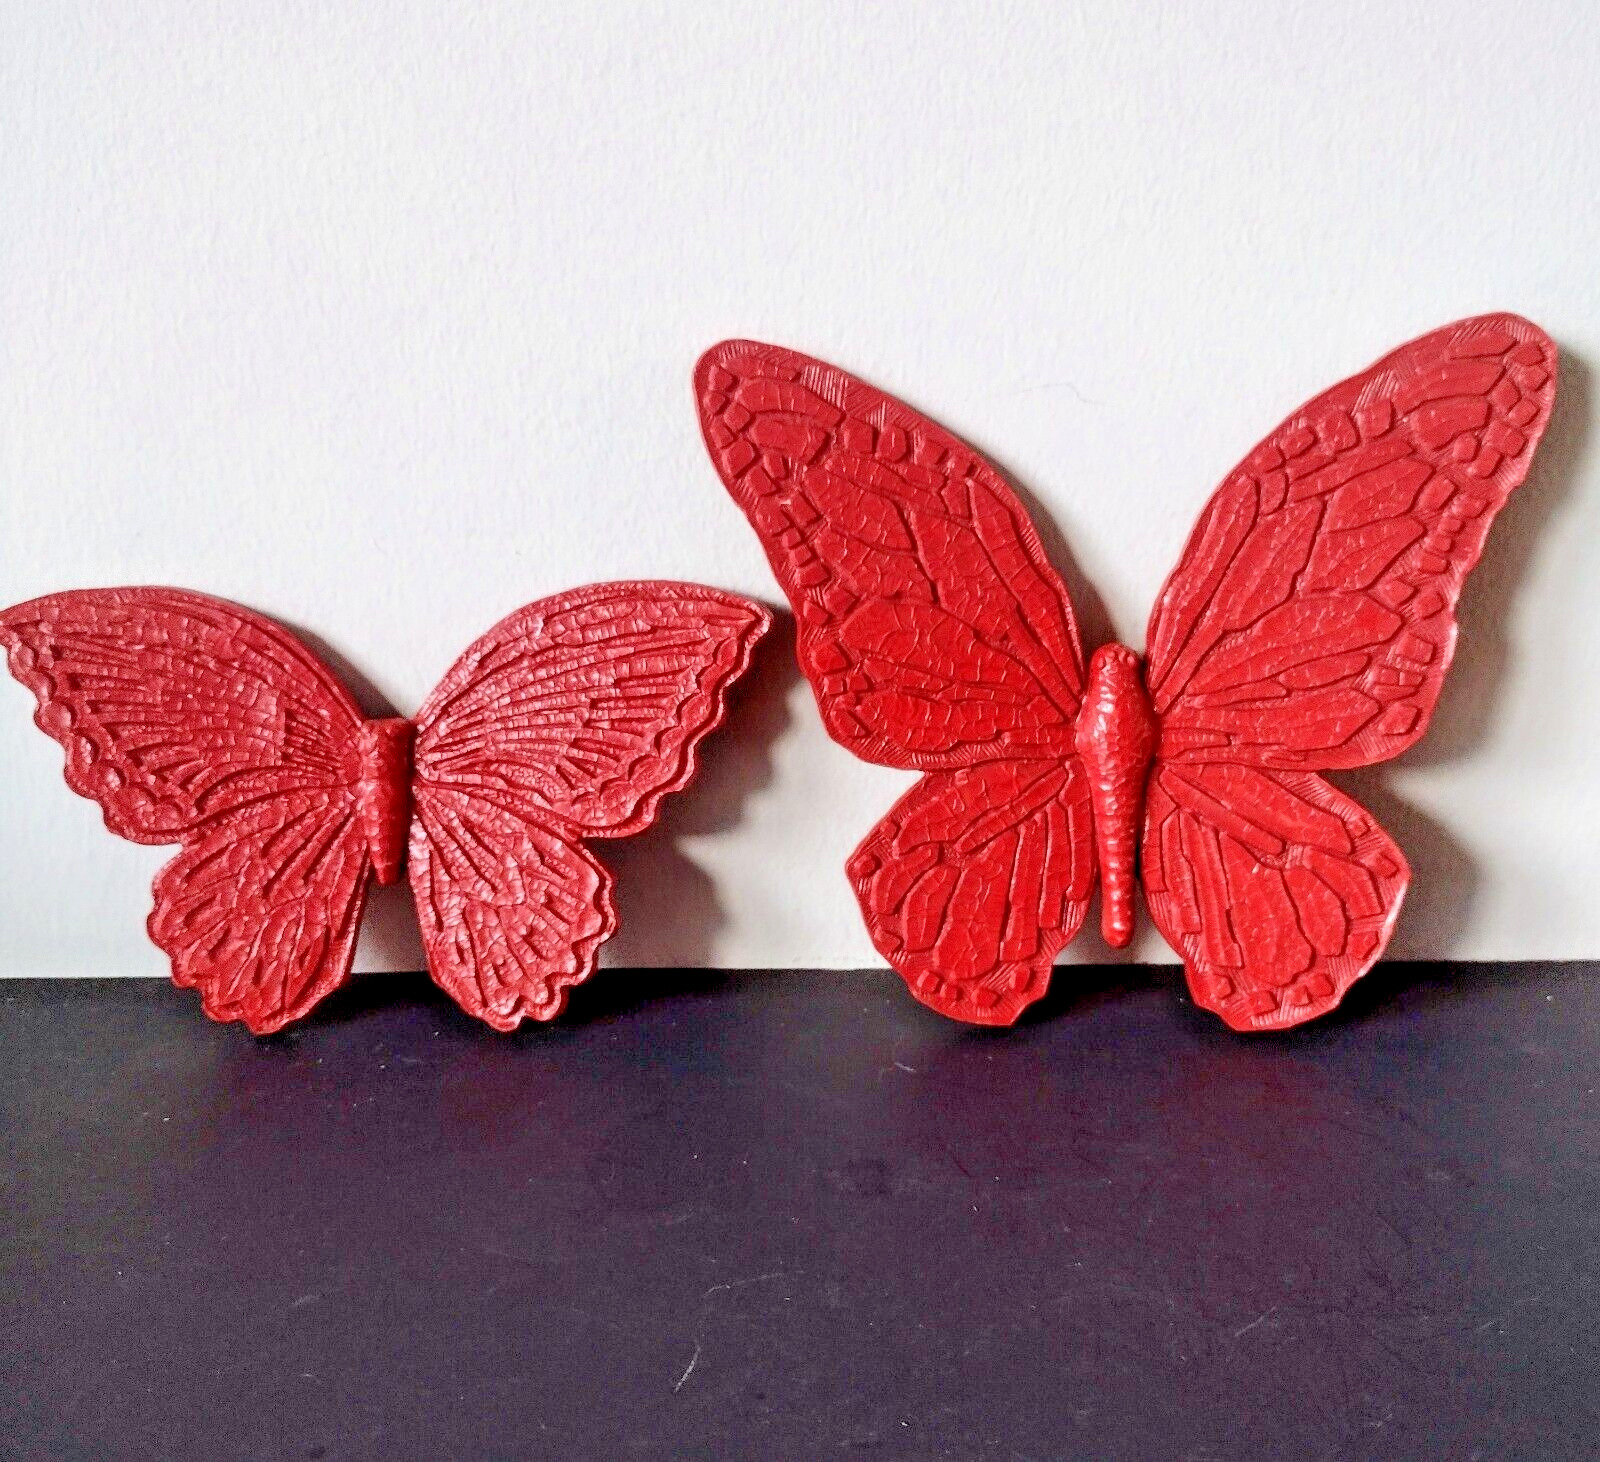 2 Ventage Homco Syroco Plastic Butterflies Wall Decor Made in USA Red/Orange 